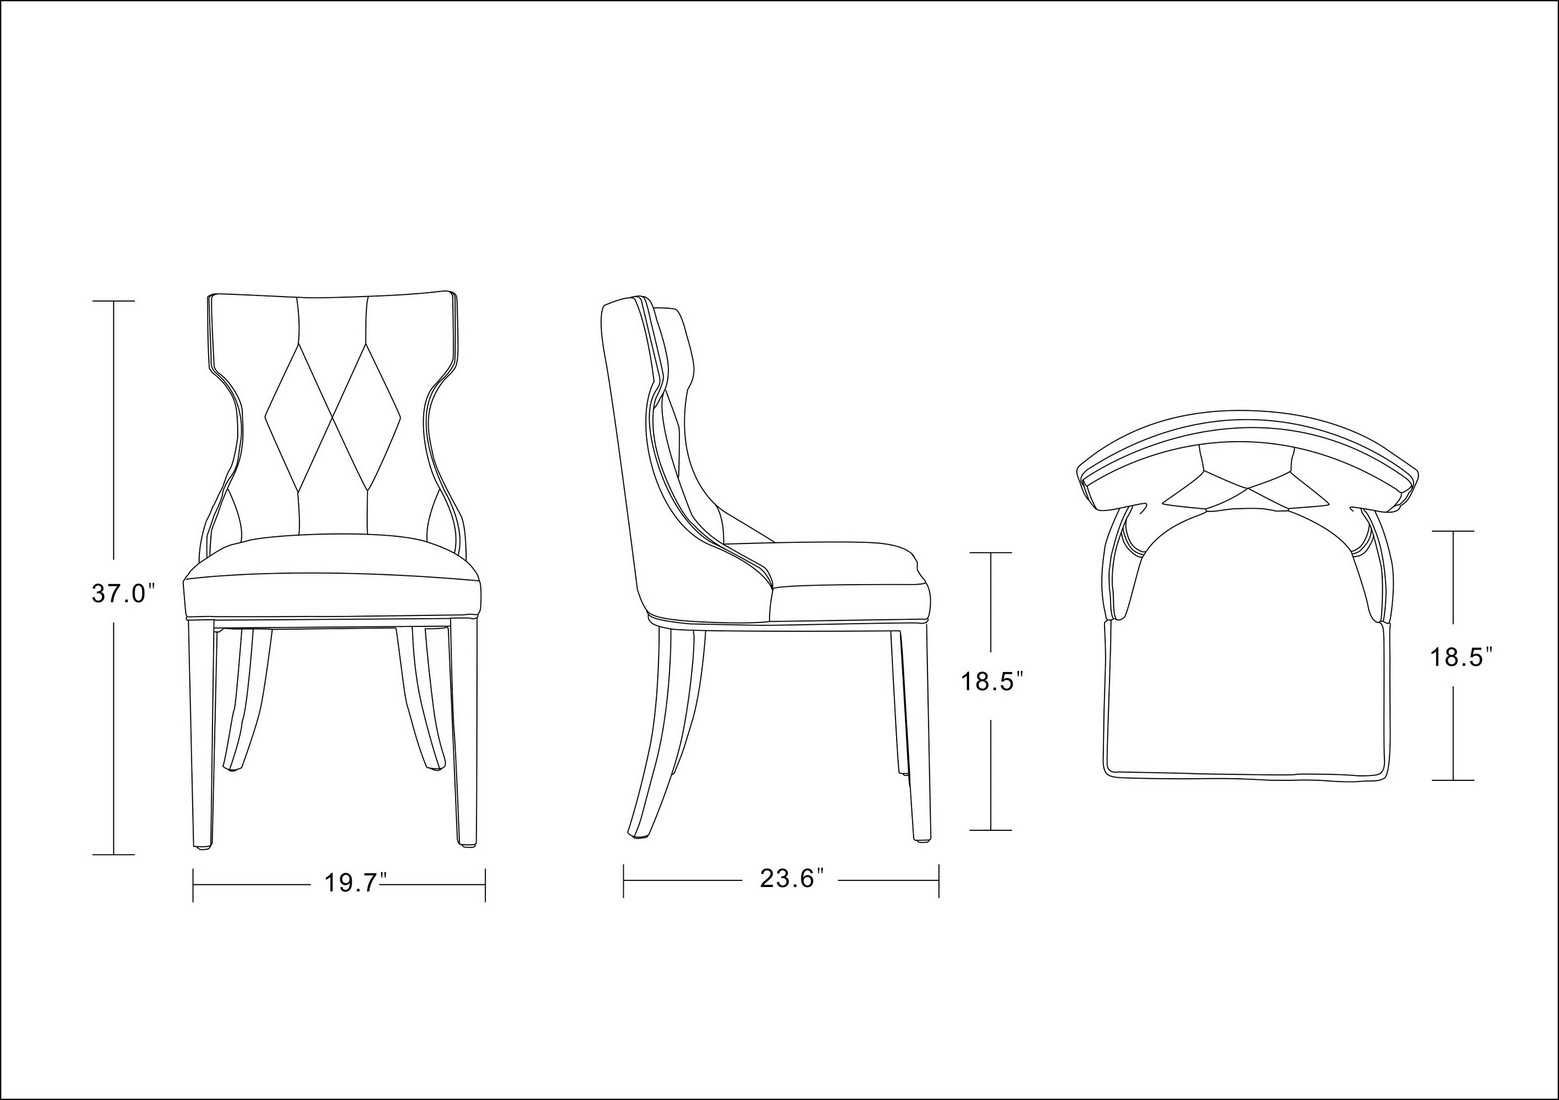 Weight and Dimension (Length, Depth, Width, Height) of Mondella Supalor Dining Chair from Dining Table Mart (MON046301 / MON046302 / MON046303 / MON046304)